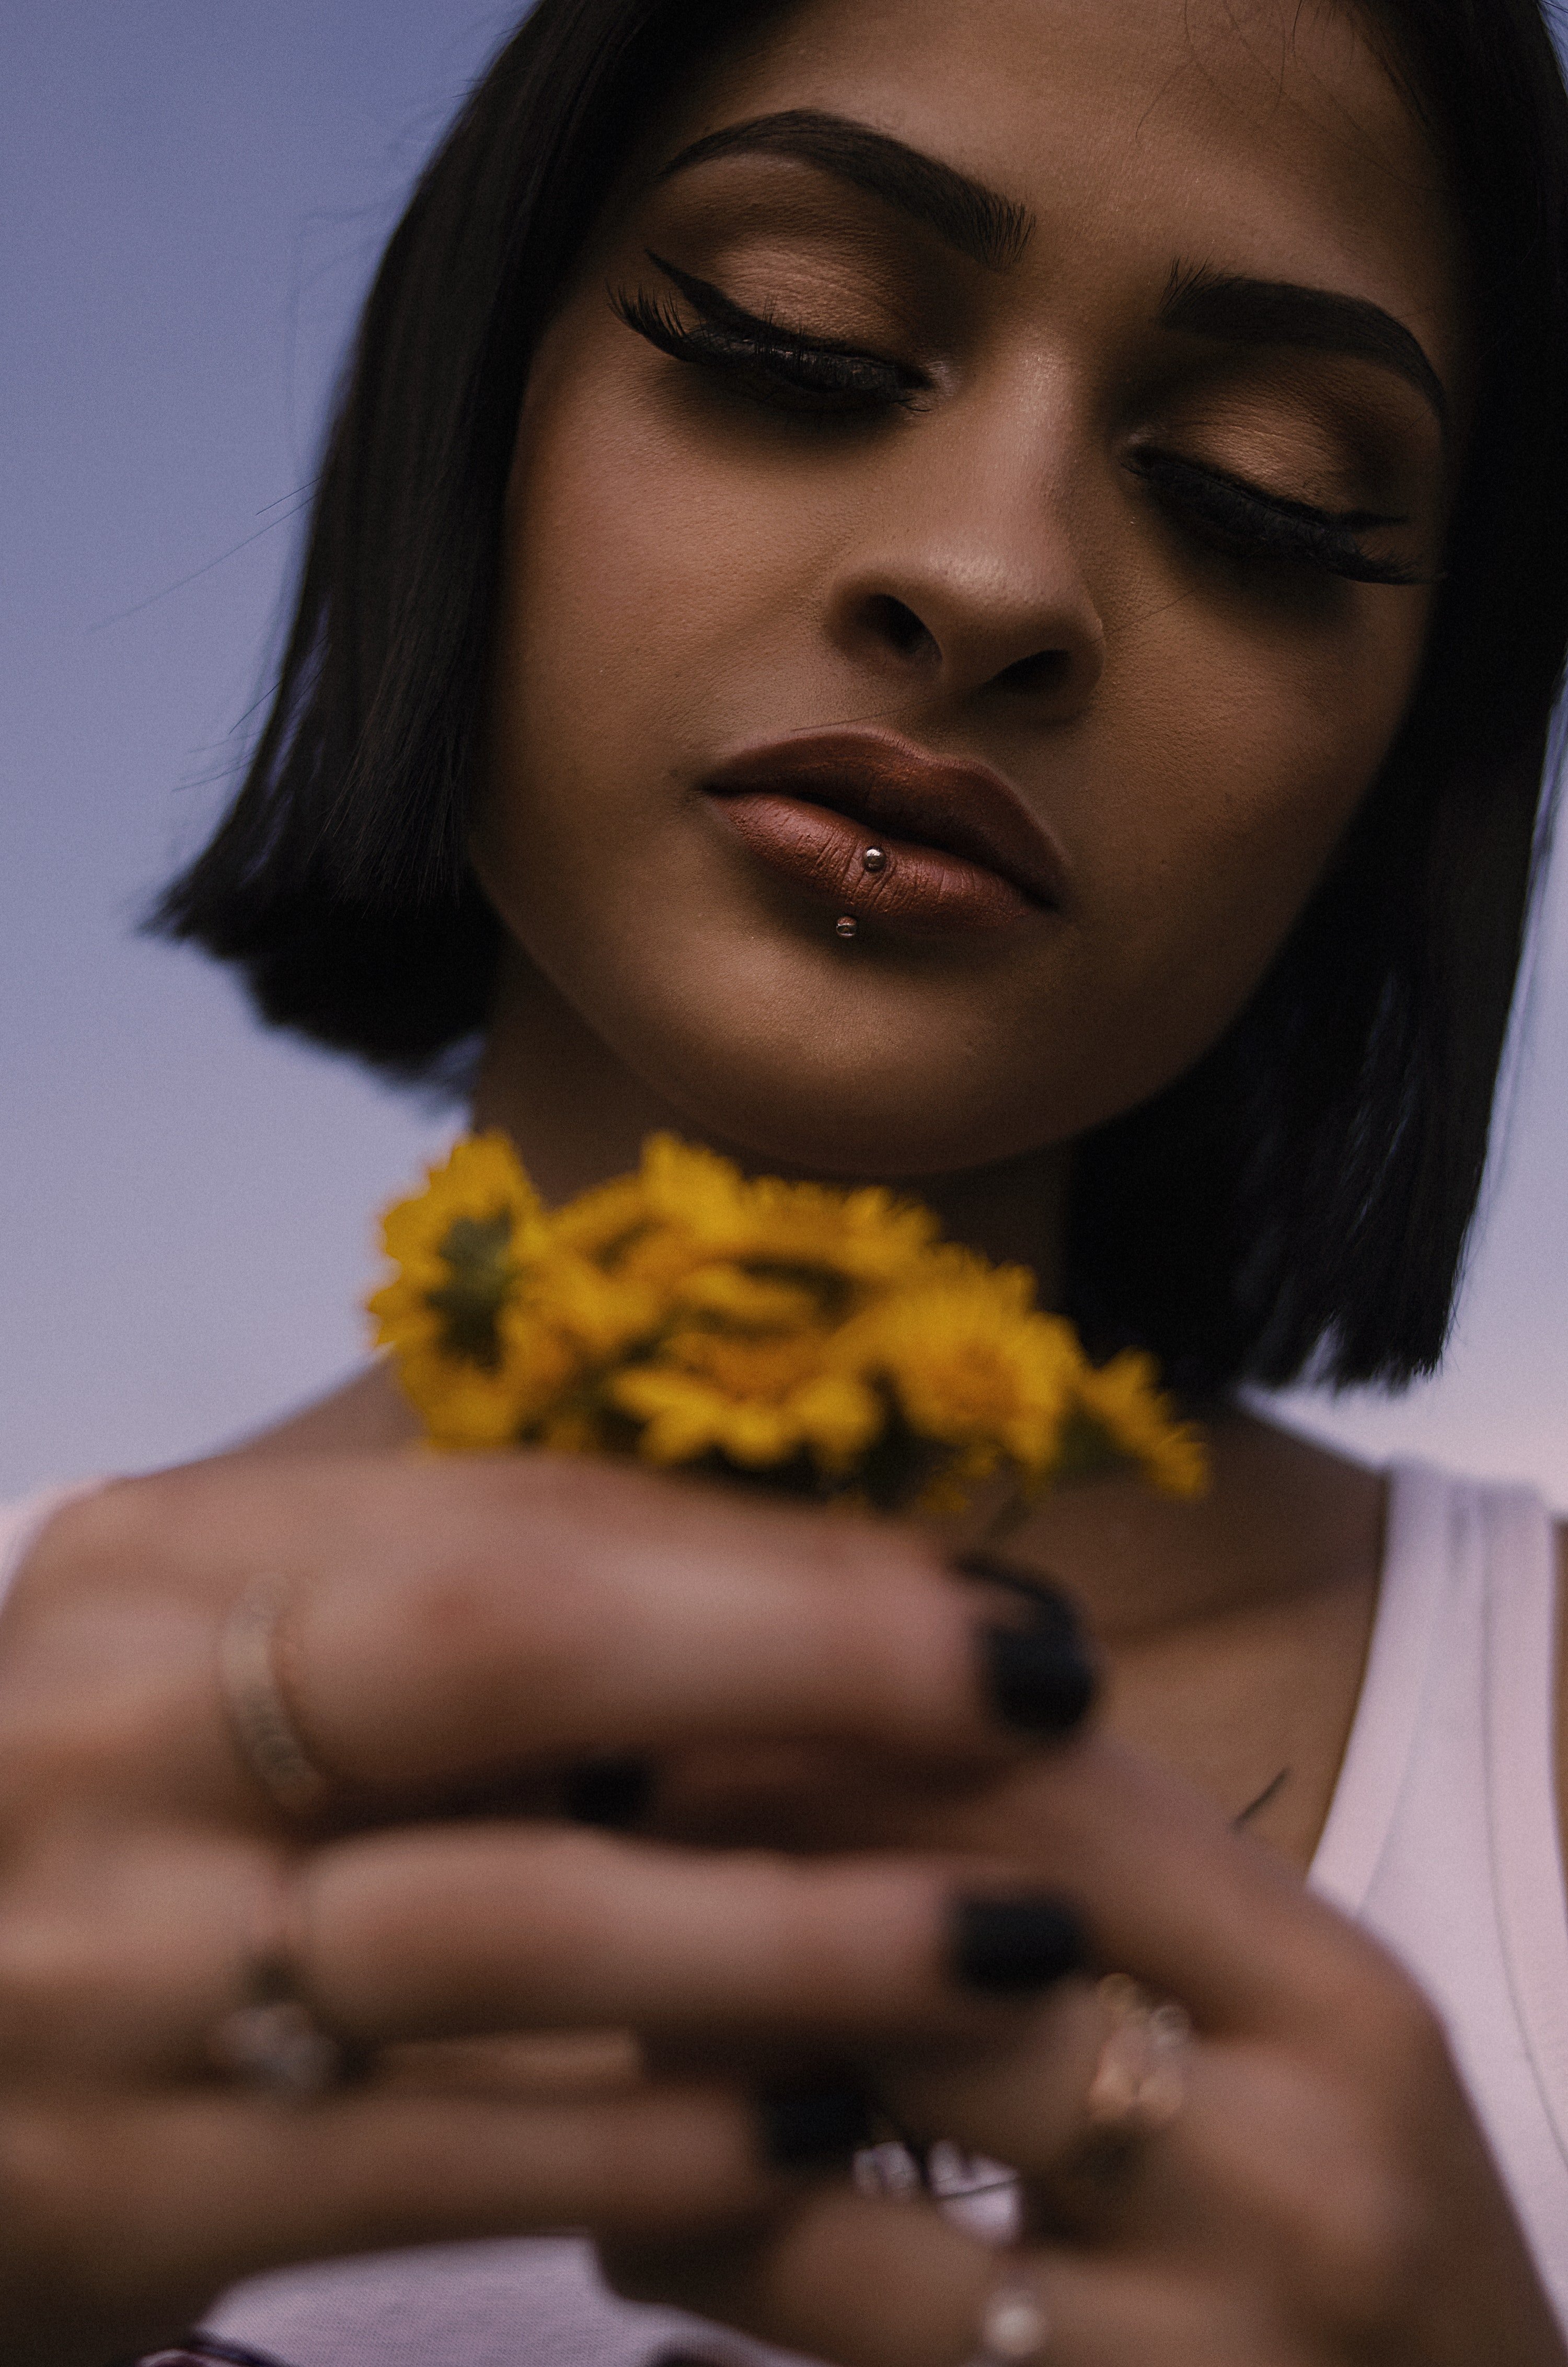 Woman with labret piercing holding yellow flowers | Source: Pexels.com/Juan Ló